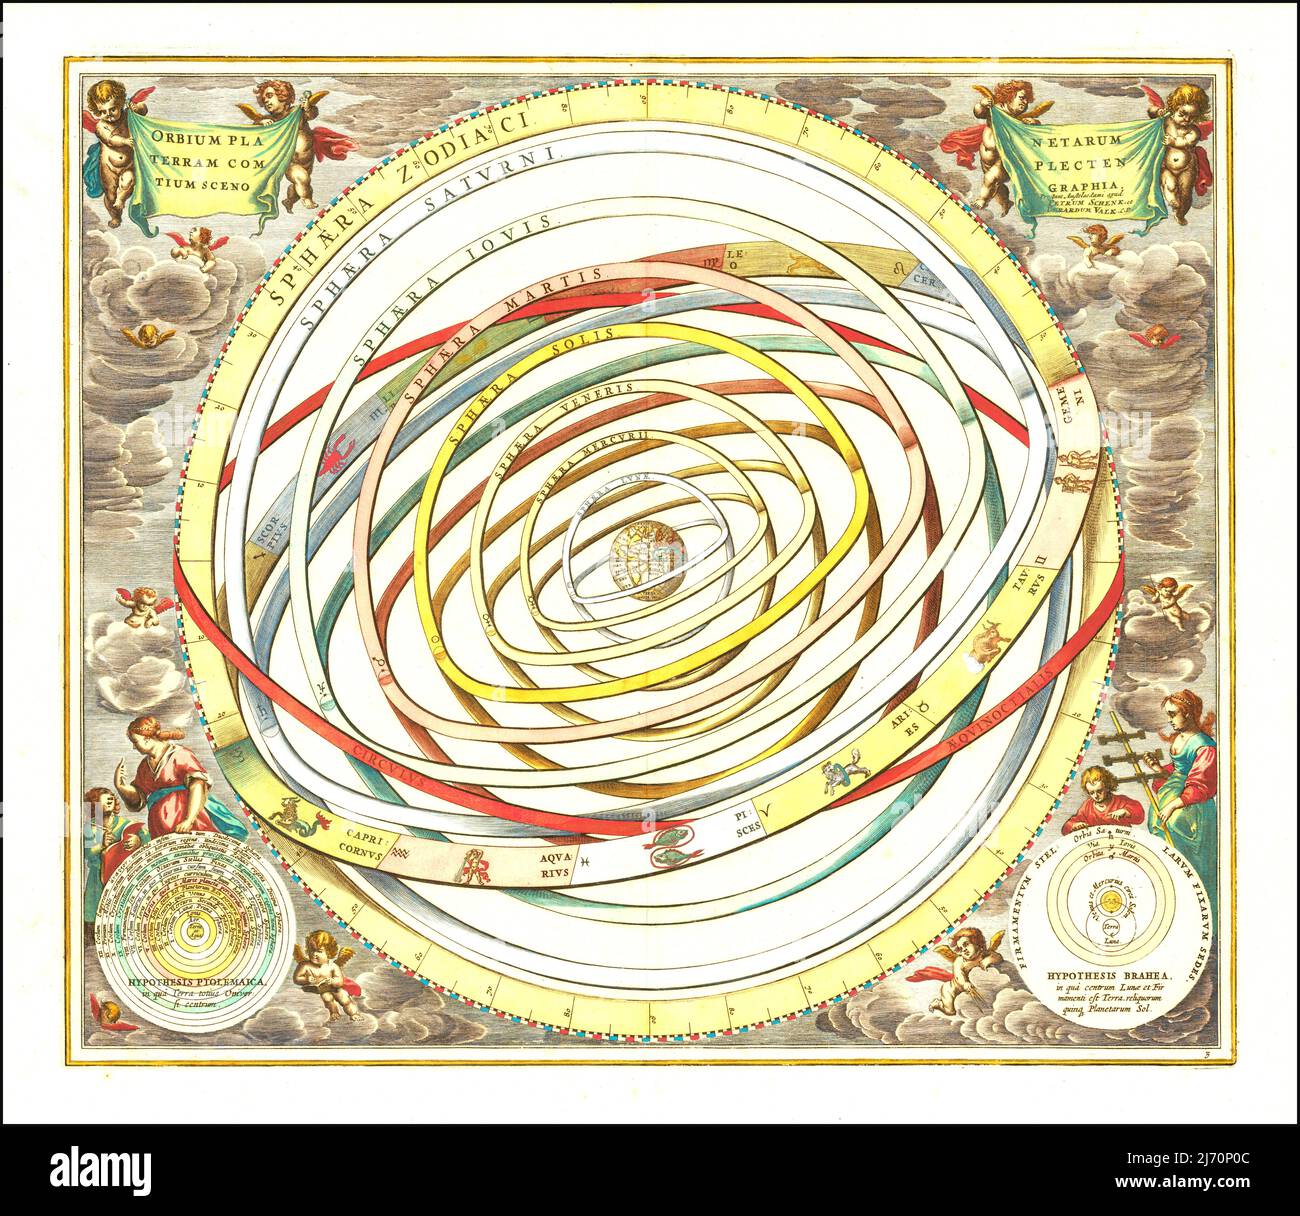 Andreas Cellarius - Model of the Orbits of the Planets - 1660 Stock Photo